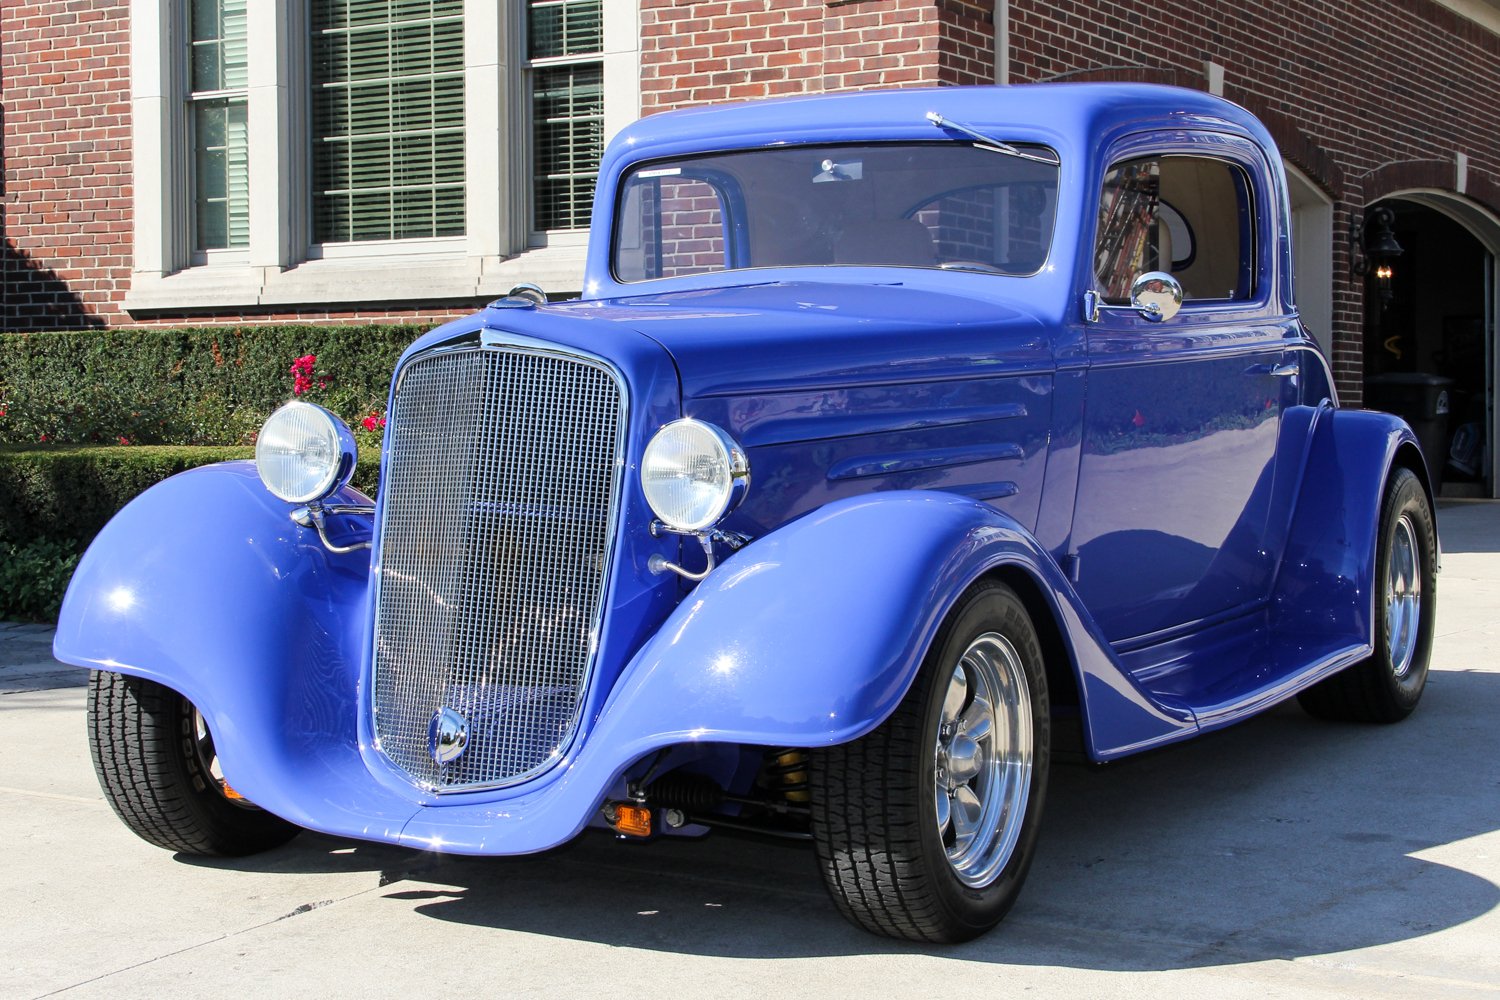 1934 Chevrolet 3-Window Coupe | Classic Cars for Sale Michigan: Muscle